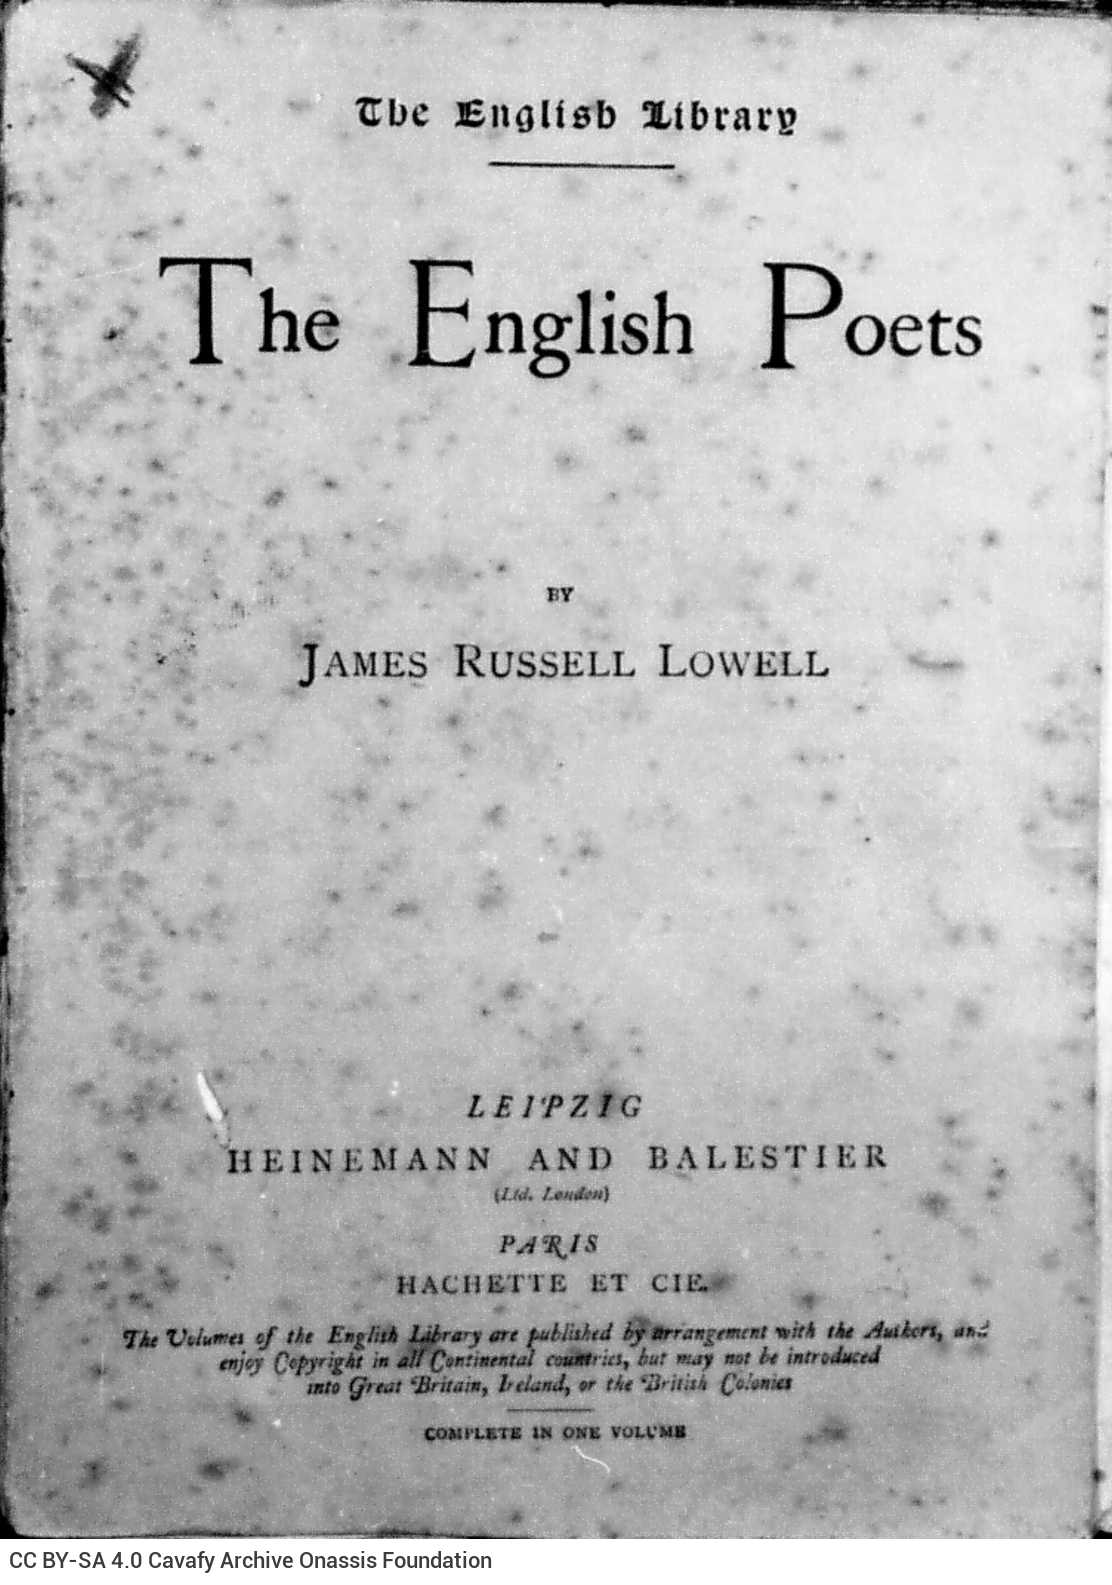 Handwritten note by Cavafy in a bifolio placed in the volume *The English Poets* by James Russell Lowell (James Russell Lo